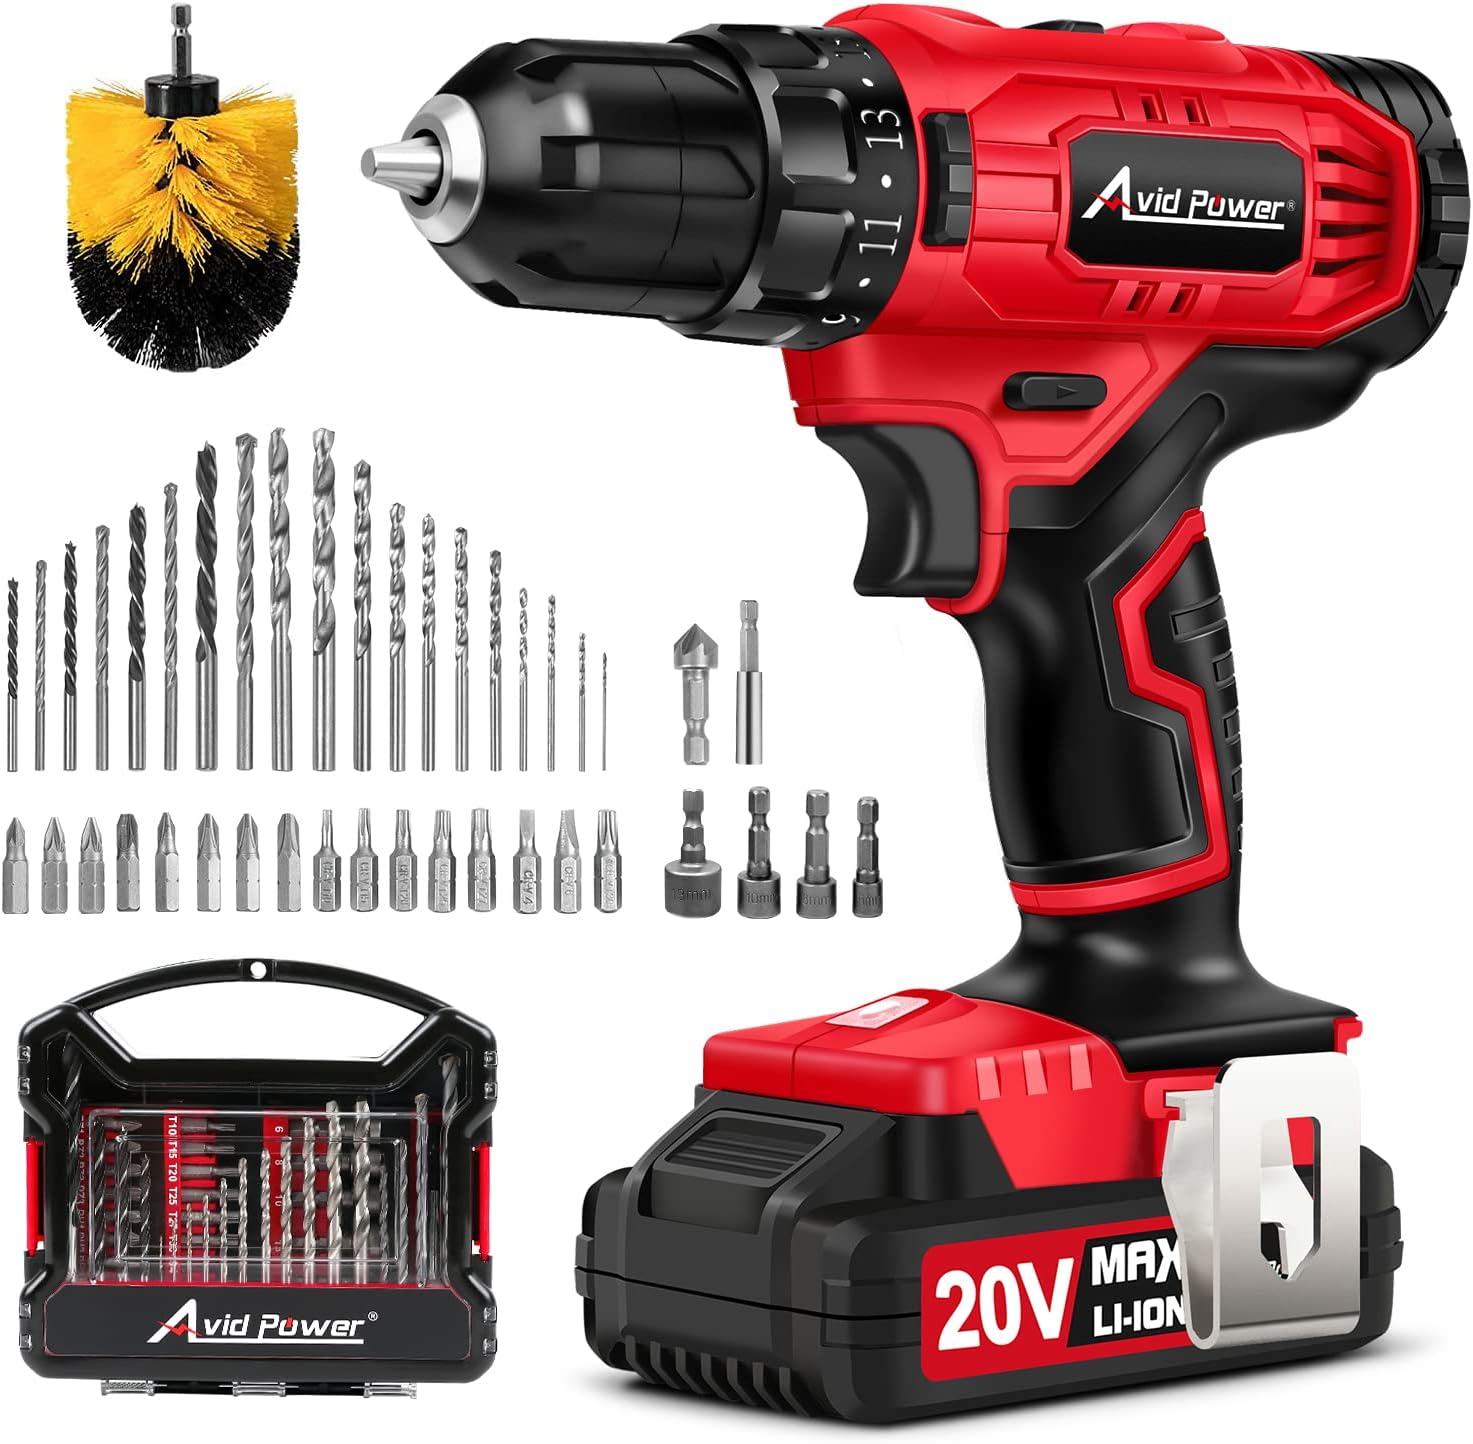 AVID POWER 20V Cordless Drill Set 320 In-lbs Torque Power Drill/Driver Kit with 41pcs Accessories and Drill Brush, 2 Variable S